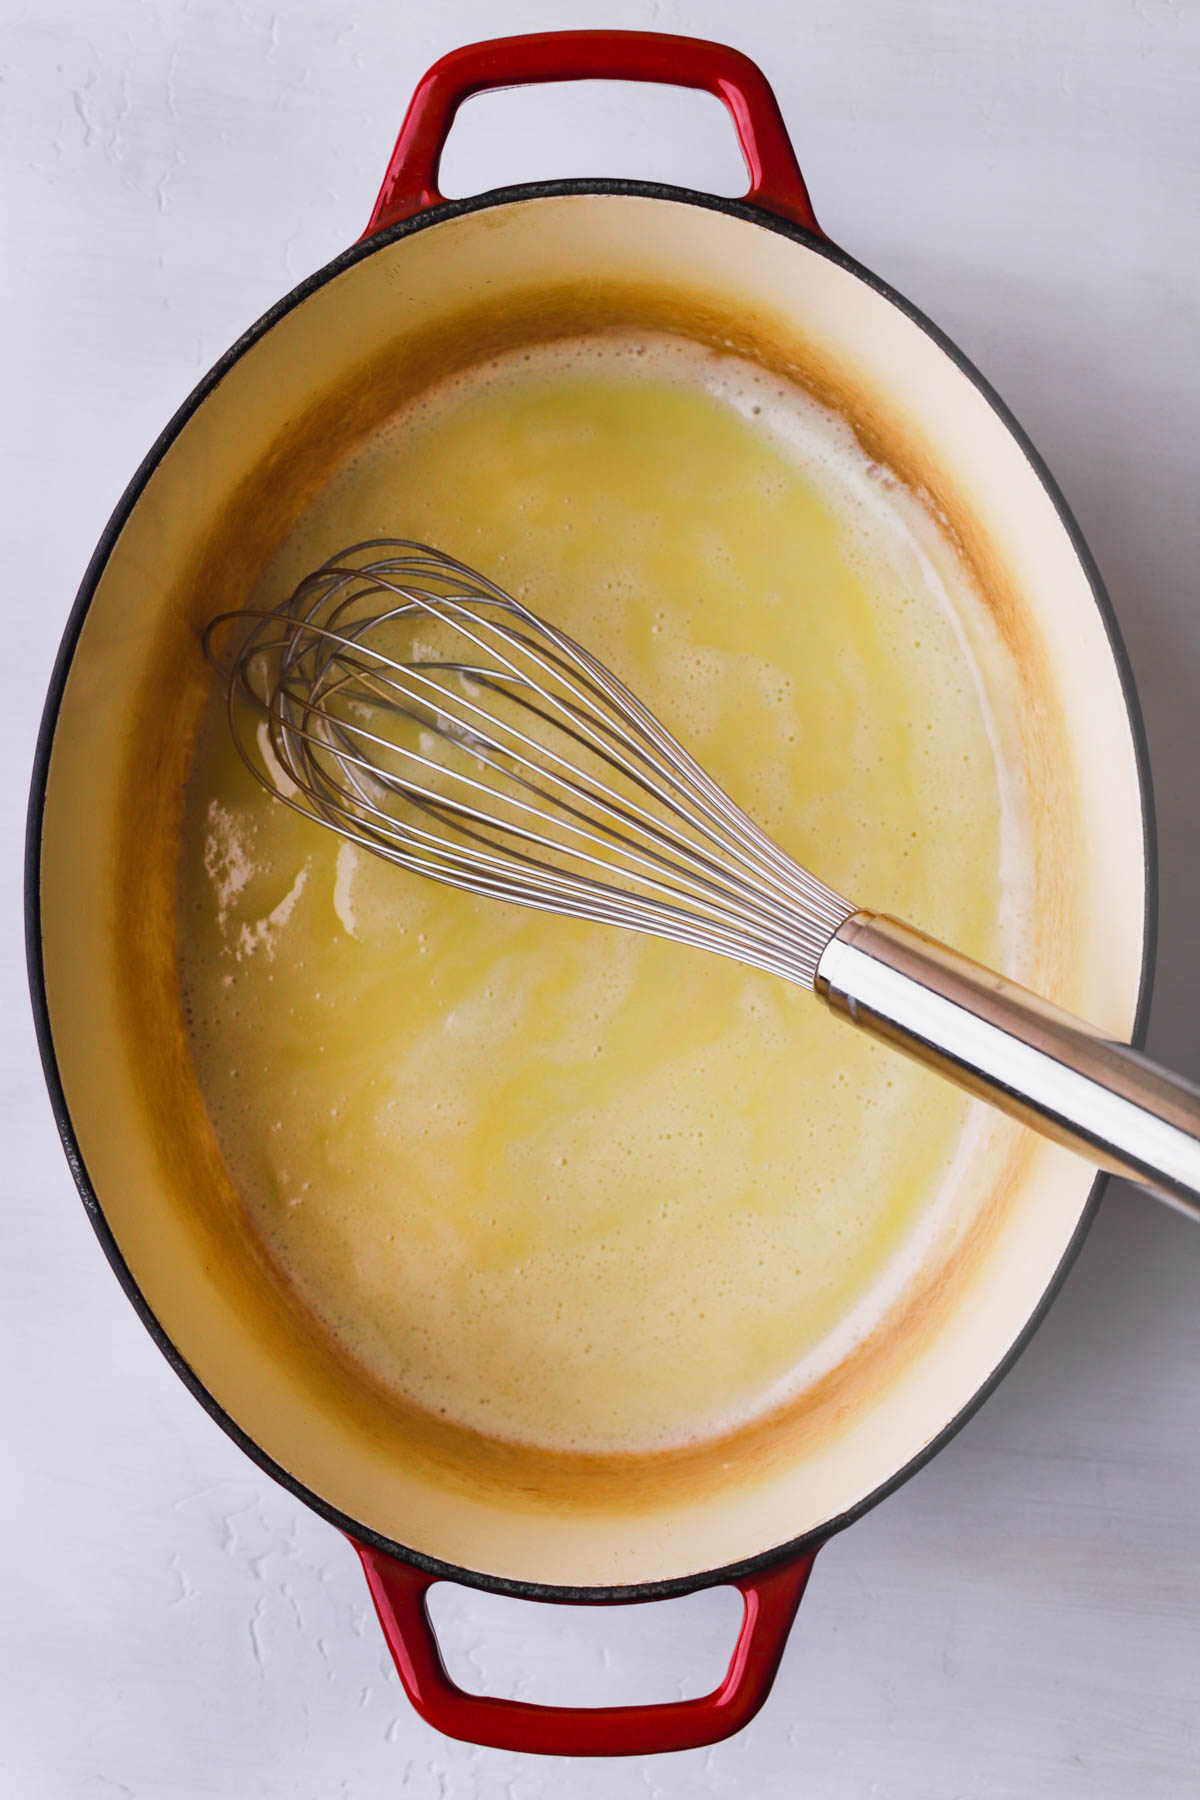 Flour and melted butter mixed together to form roux.